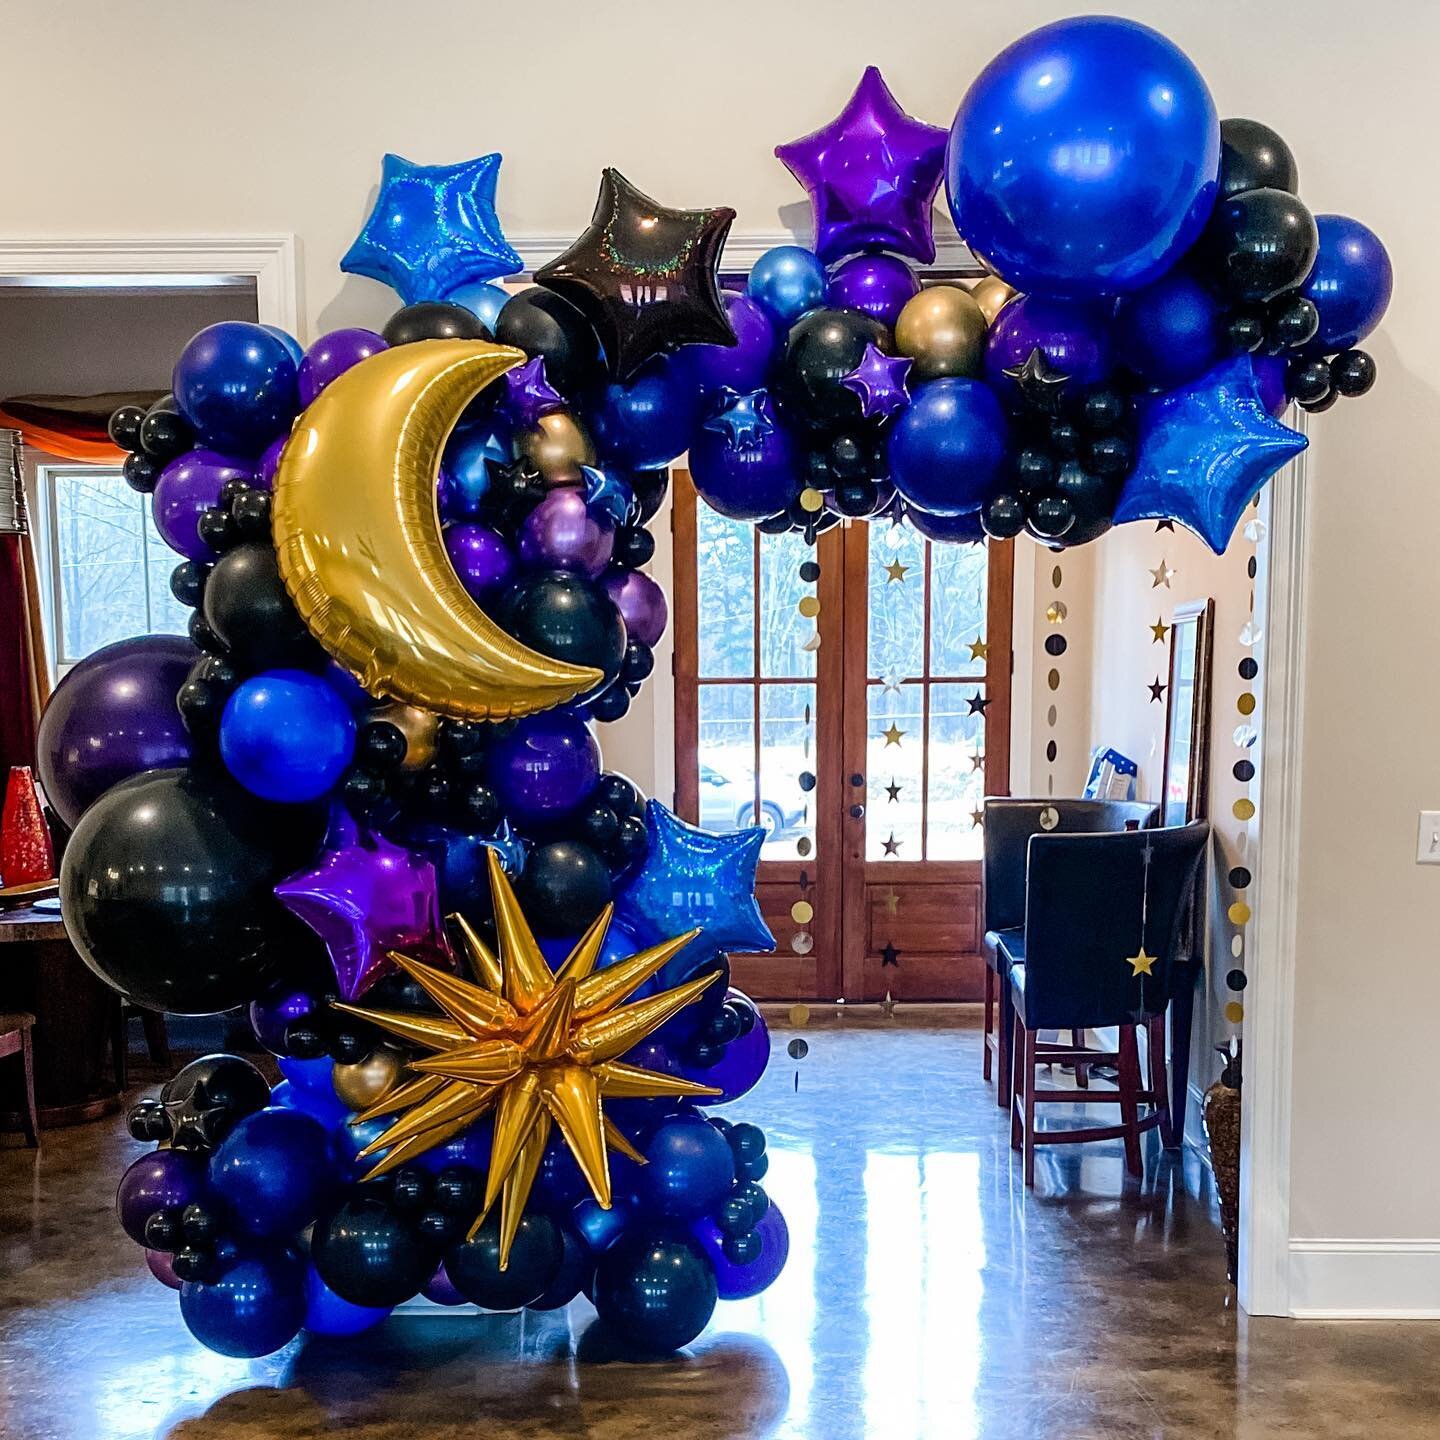 ✨A Star is Born✨What a way to transform a room🎈

Call/TXT 60-707-9010
Email: info@babaloonz.com

#mississippiballoonartist #babaloonz #birthdaygarland #organicballoonarch #staircasegarland #2021 #birthdayparty #smallbusinessowner #graduationparty #m